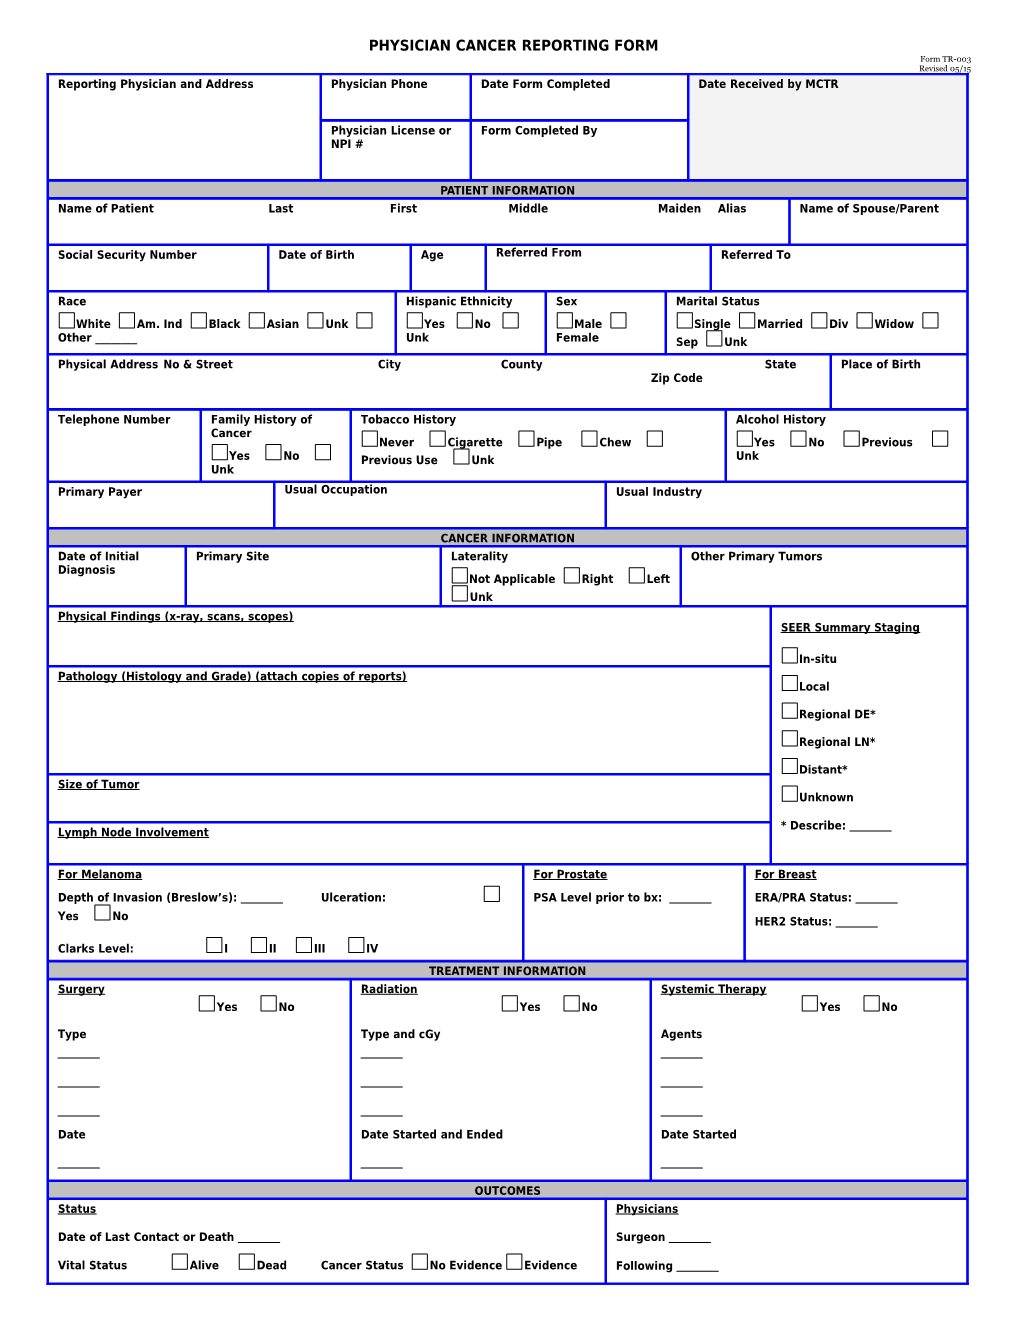 Physician Cancer Reporting Form